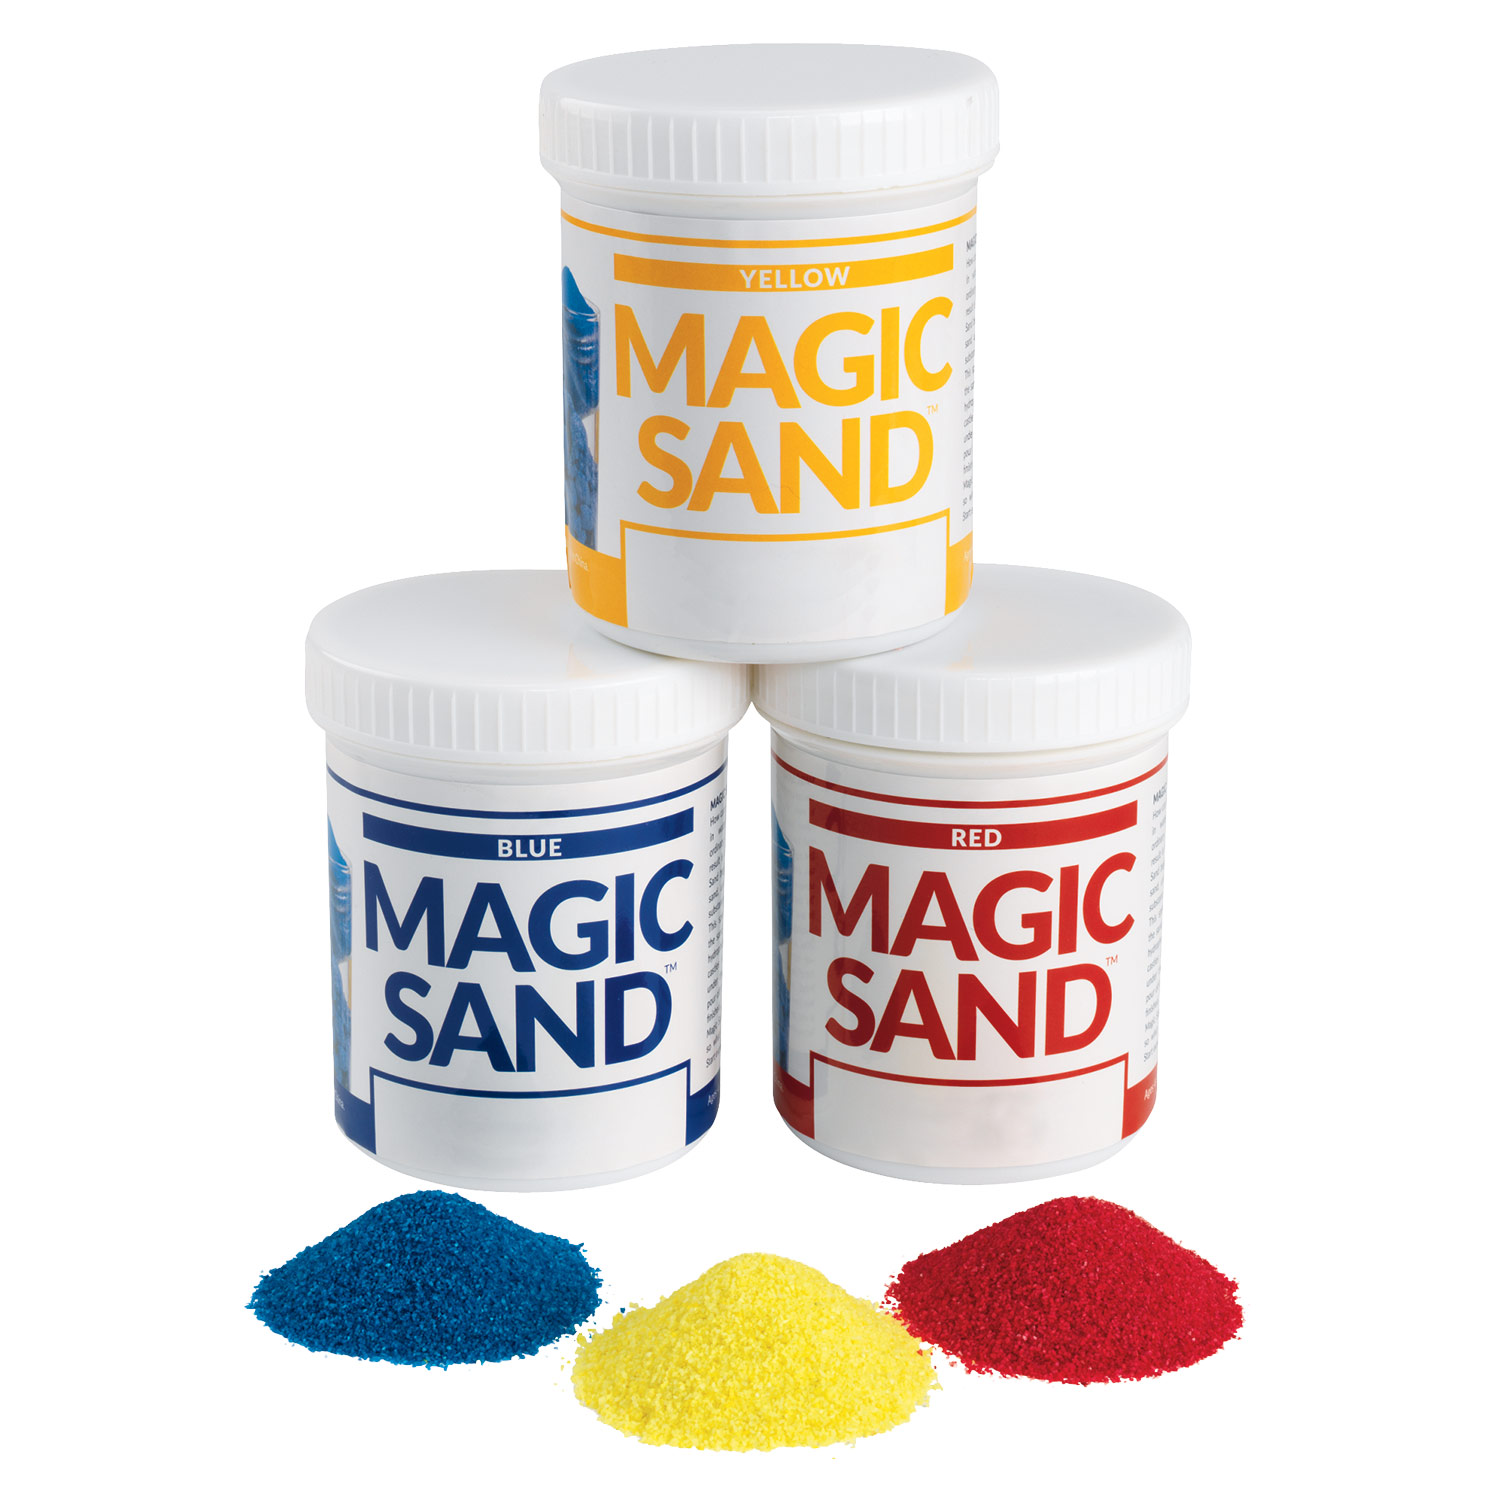 Magic Sand Not Wet - Colored Play Sand That Never Gets Wet